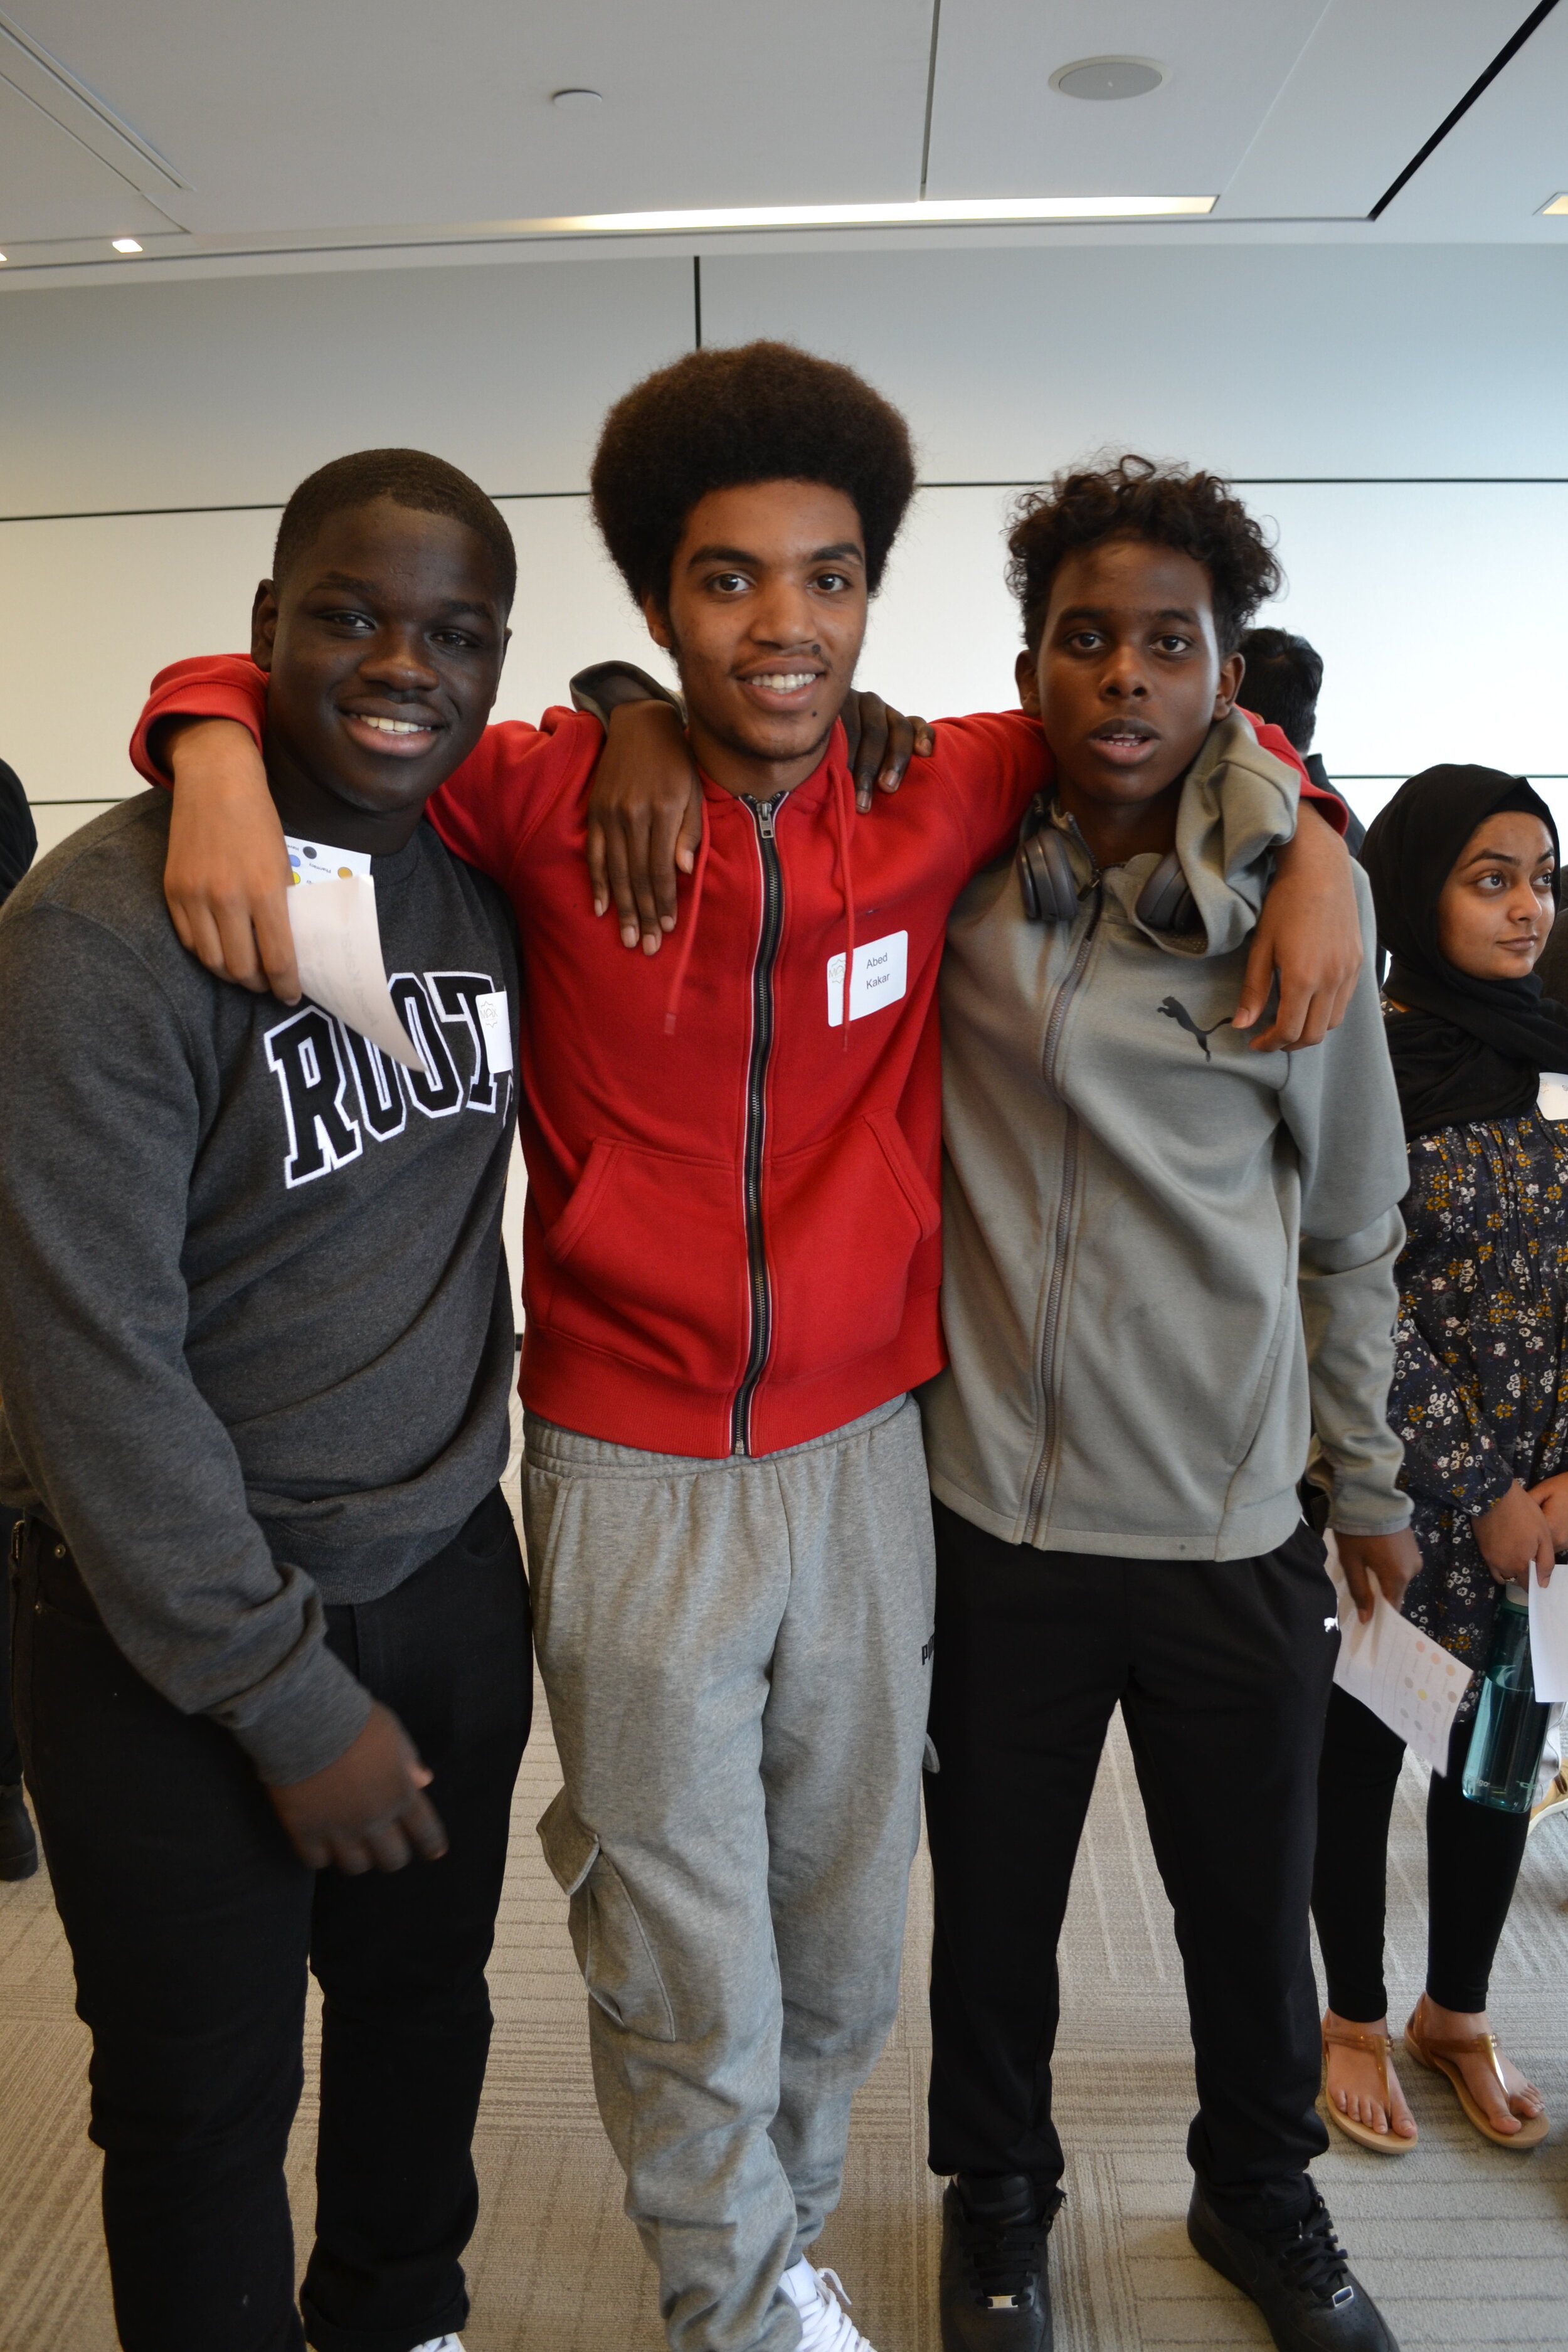  Buba and his peers at the MAX event for youth in Sep 2019 